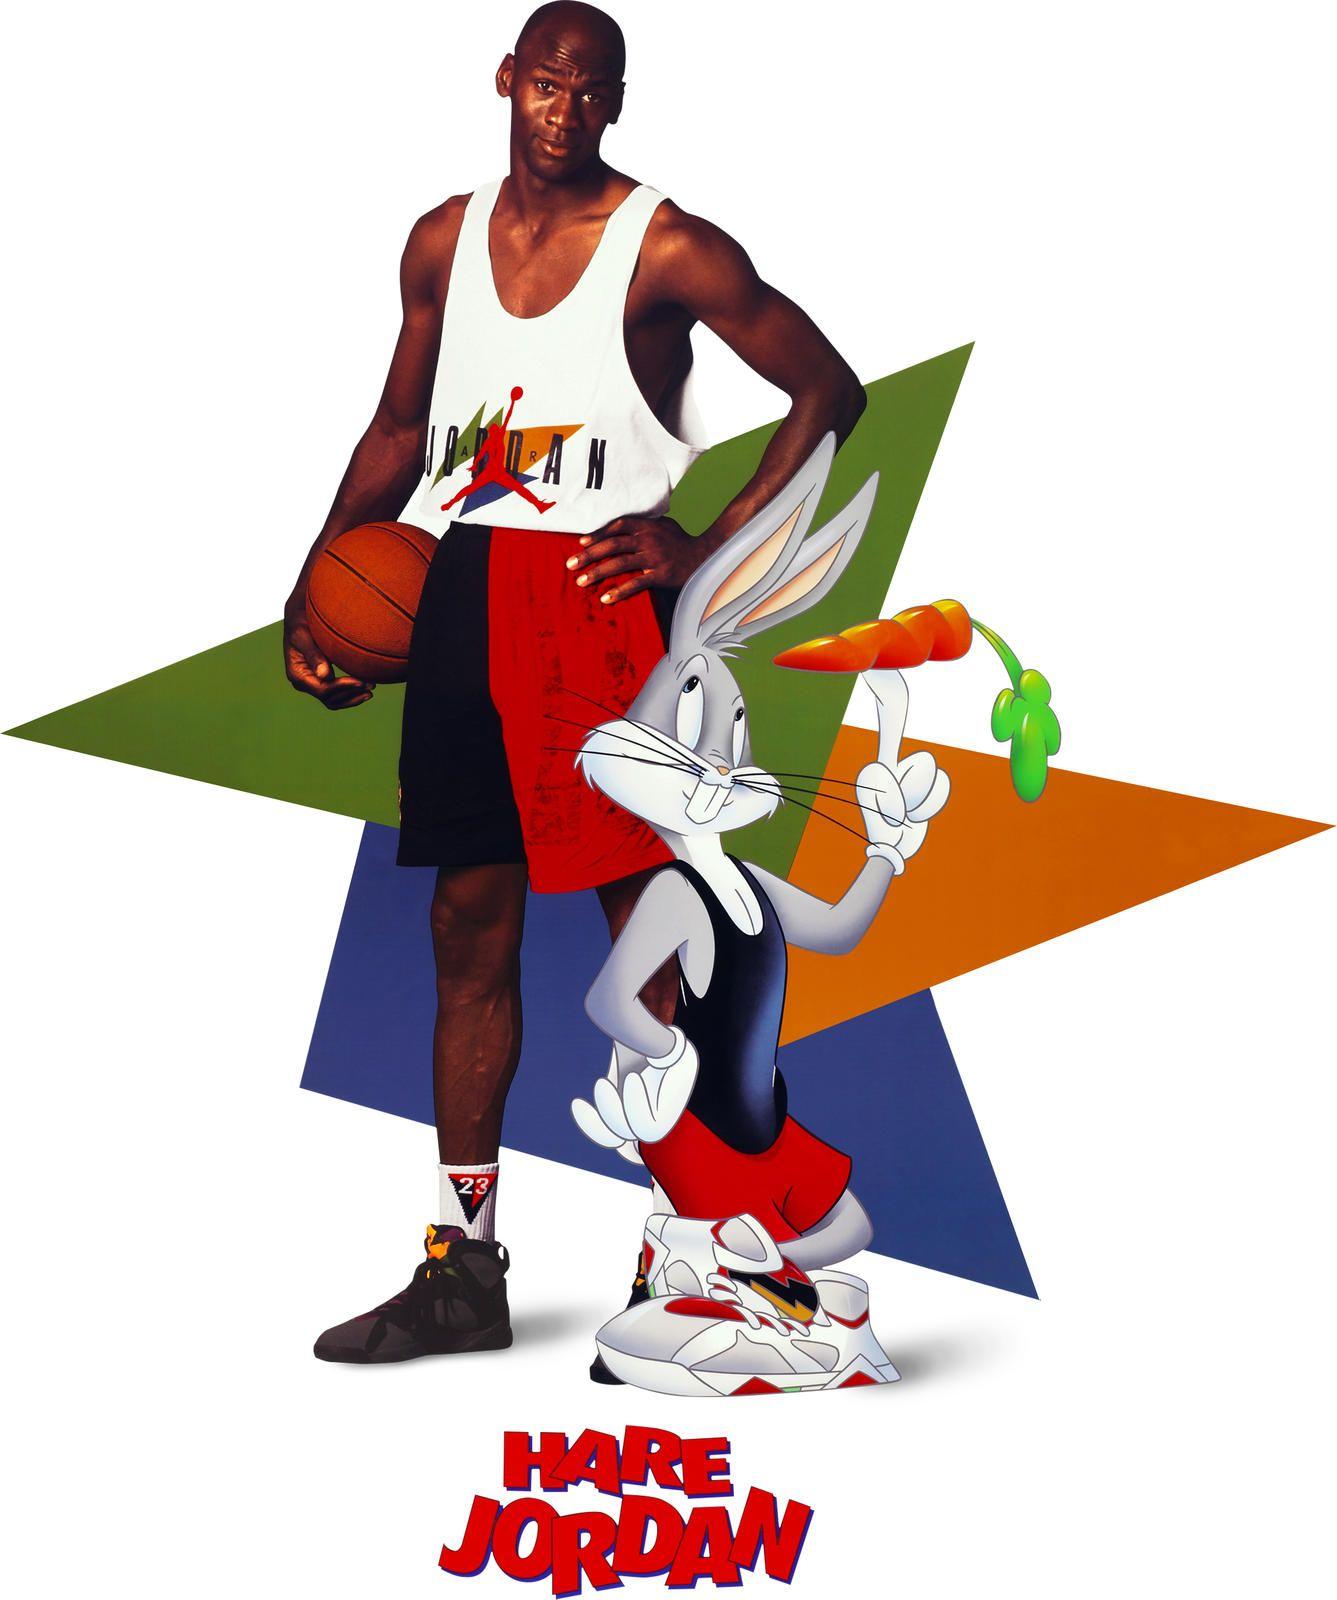 They're Back! Michael Jordan and Bugs Bunny Rekindle a Beloved